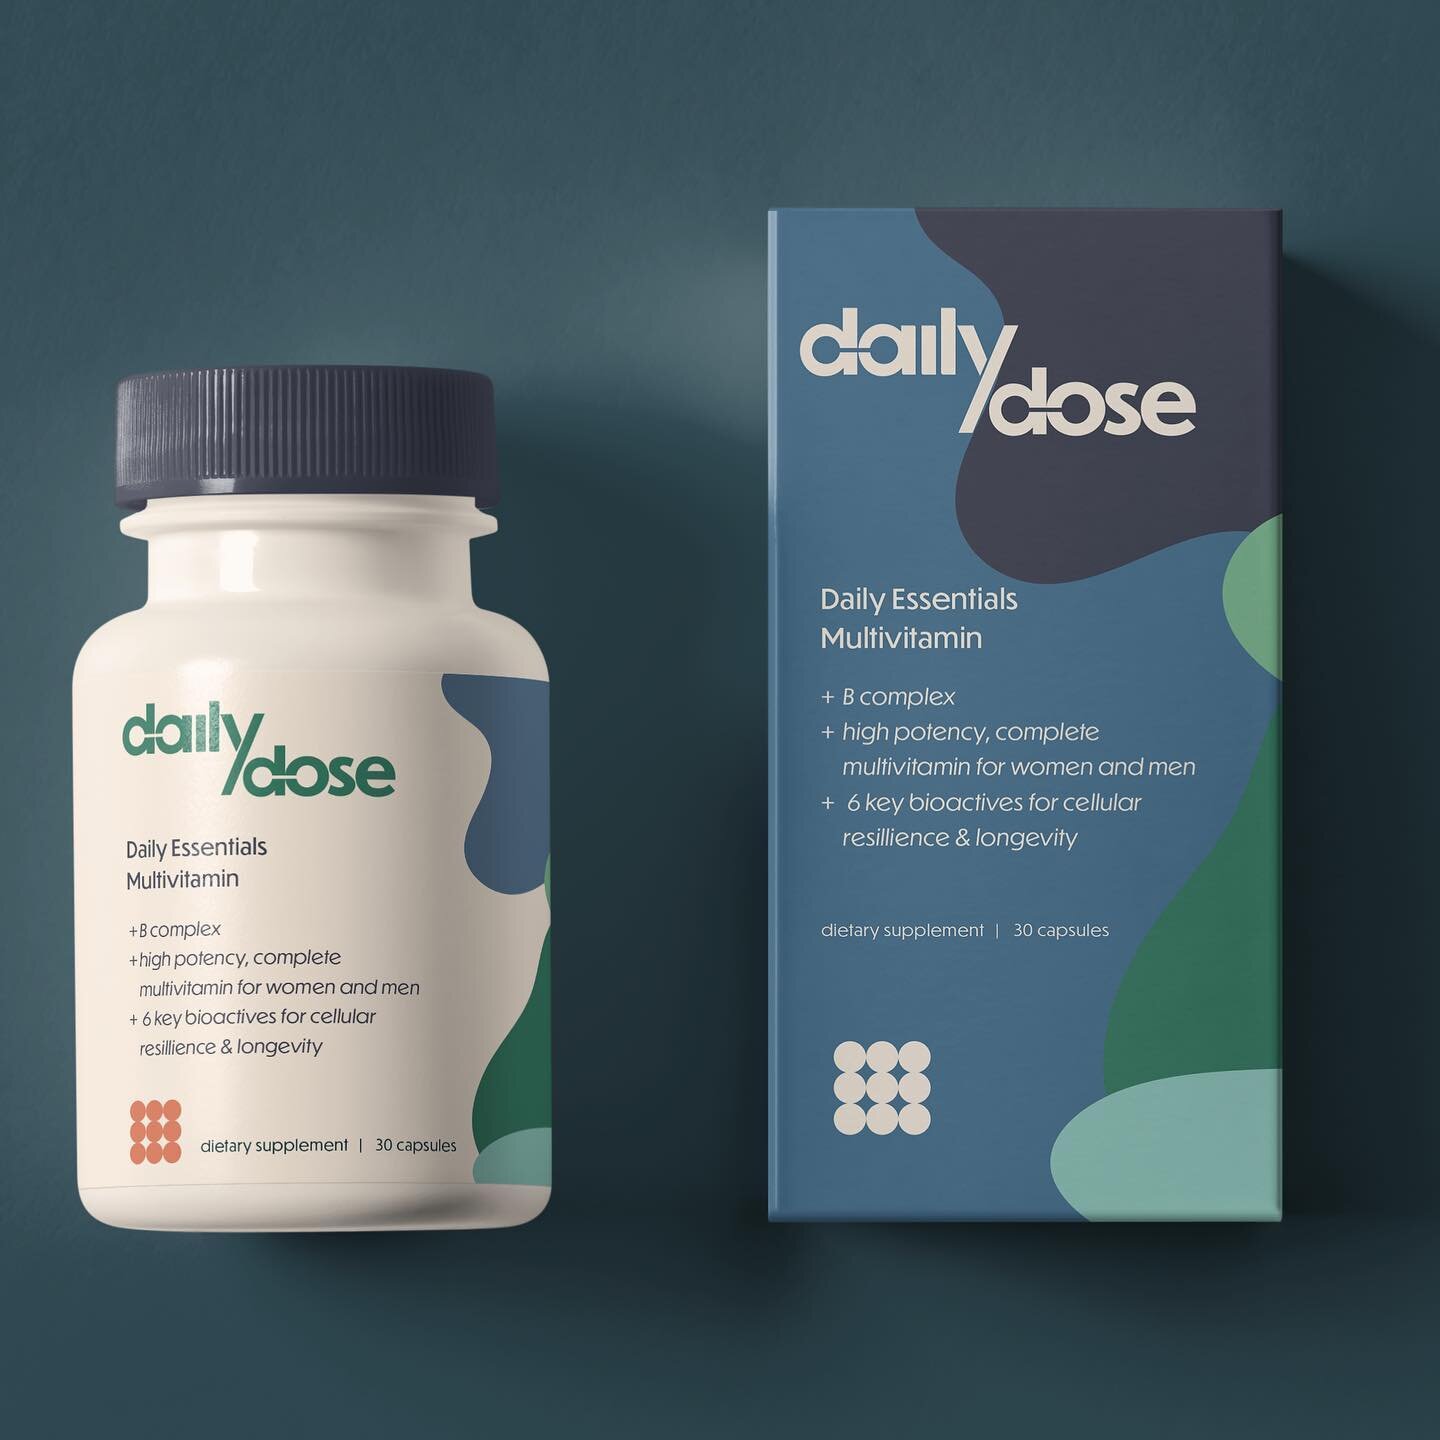 Brand reveal for Daily Dose! 

Brief by @thesocietythree @themondayagency @bystudiogem #s3dailydose 

#branding #brand #design #graphicdesign #graphicdesigner #brandidentity #illustration #packaging #packagingdesign